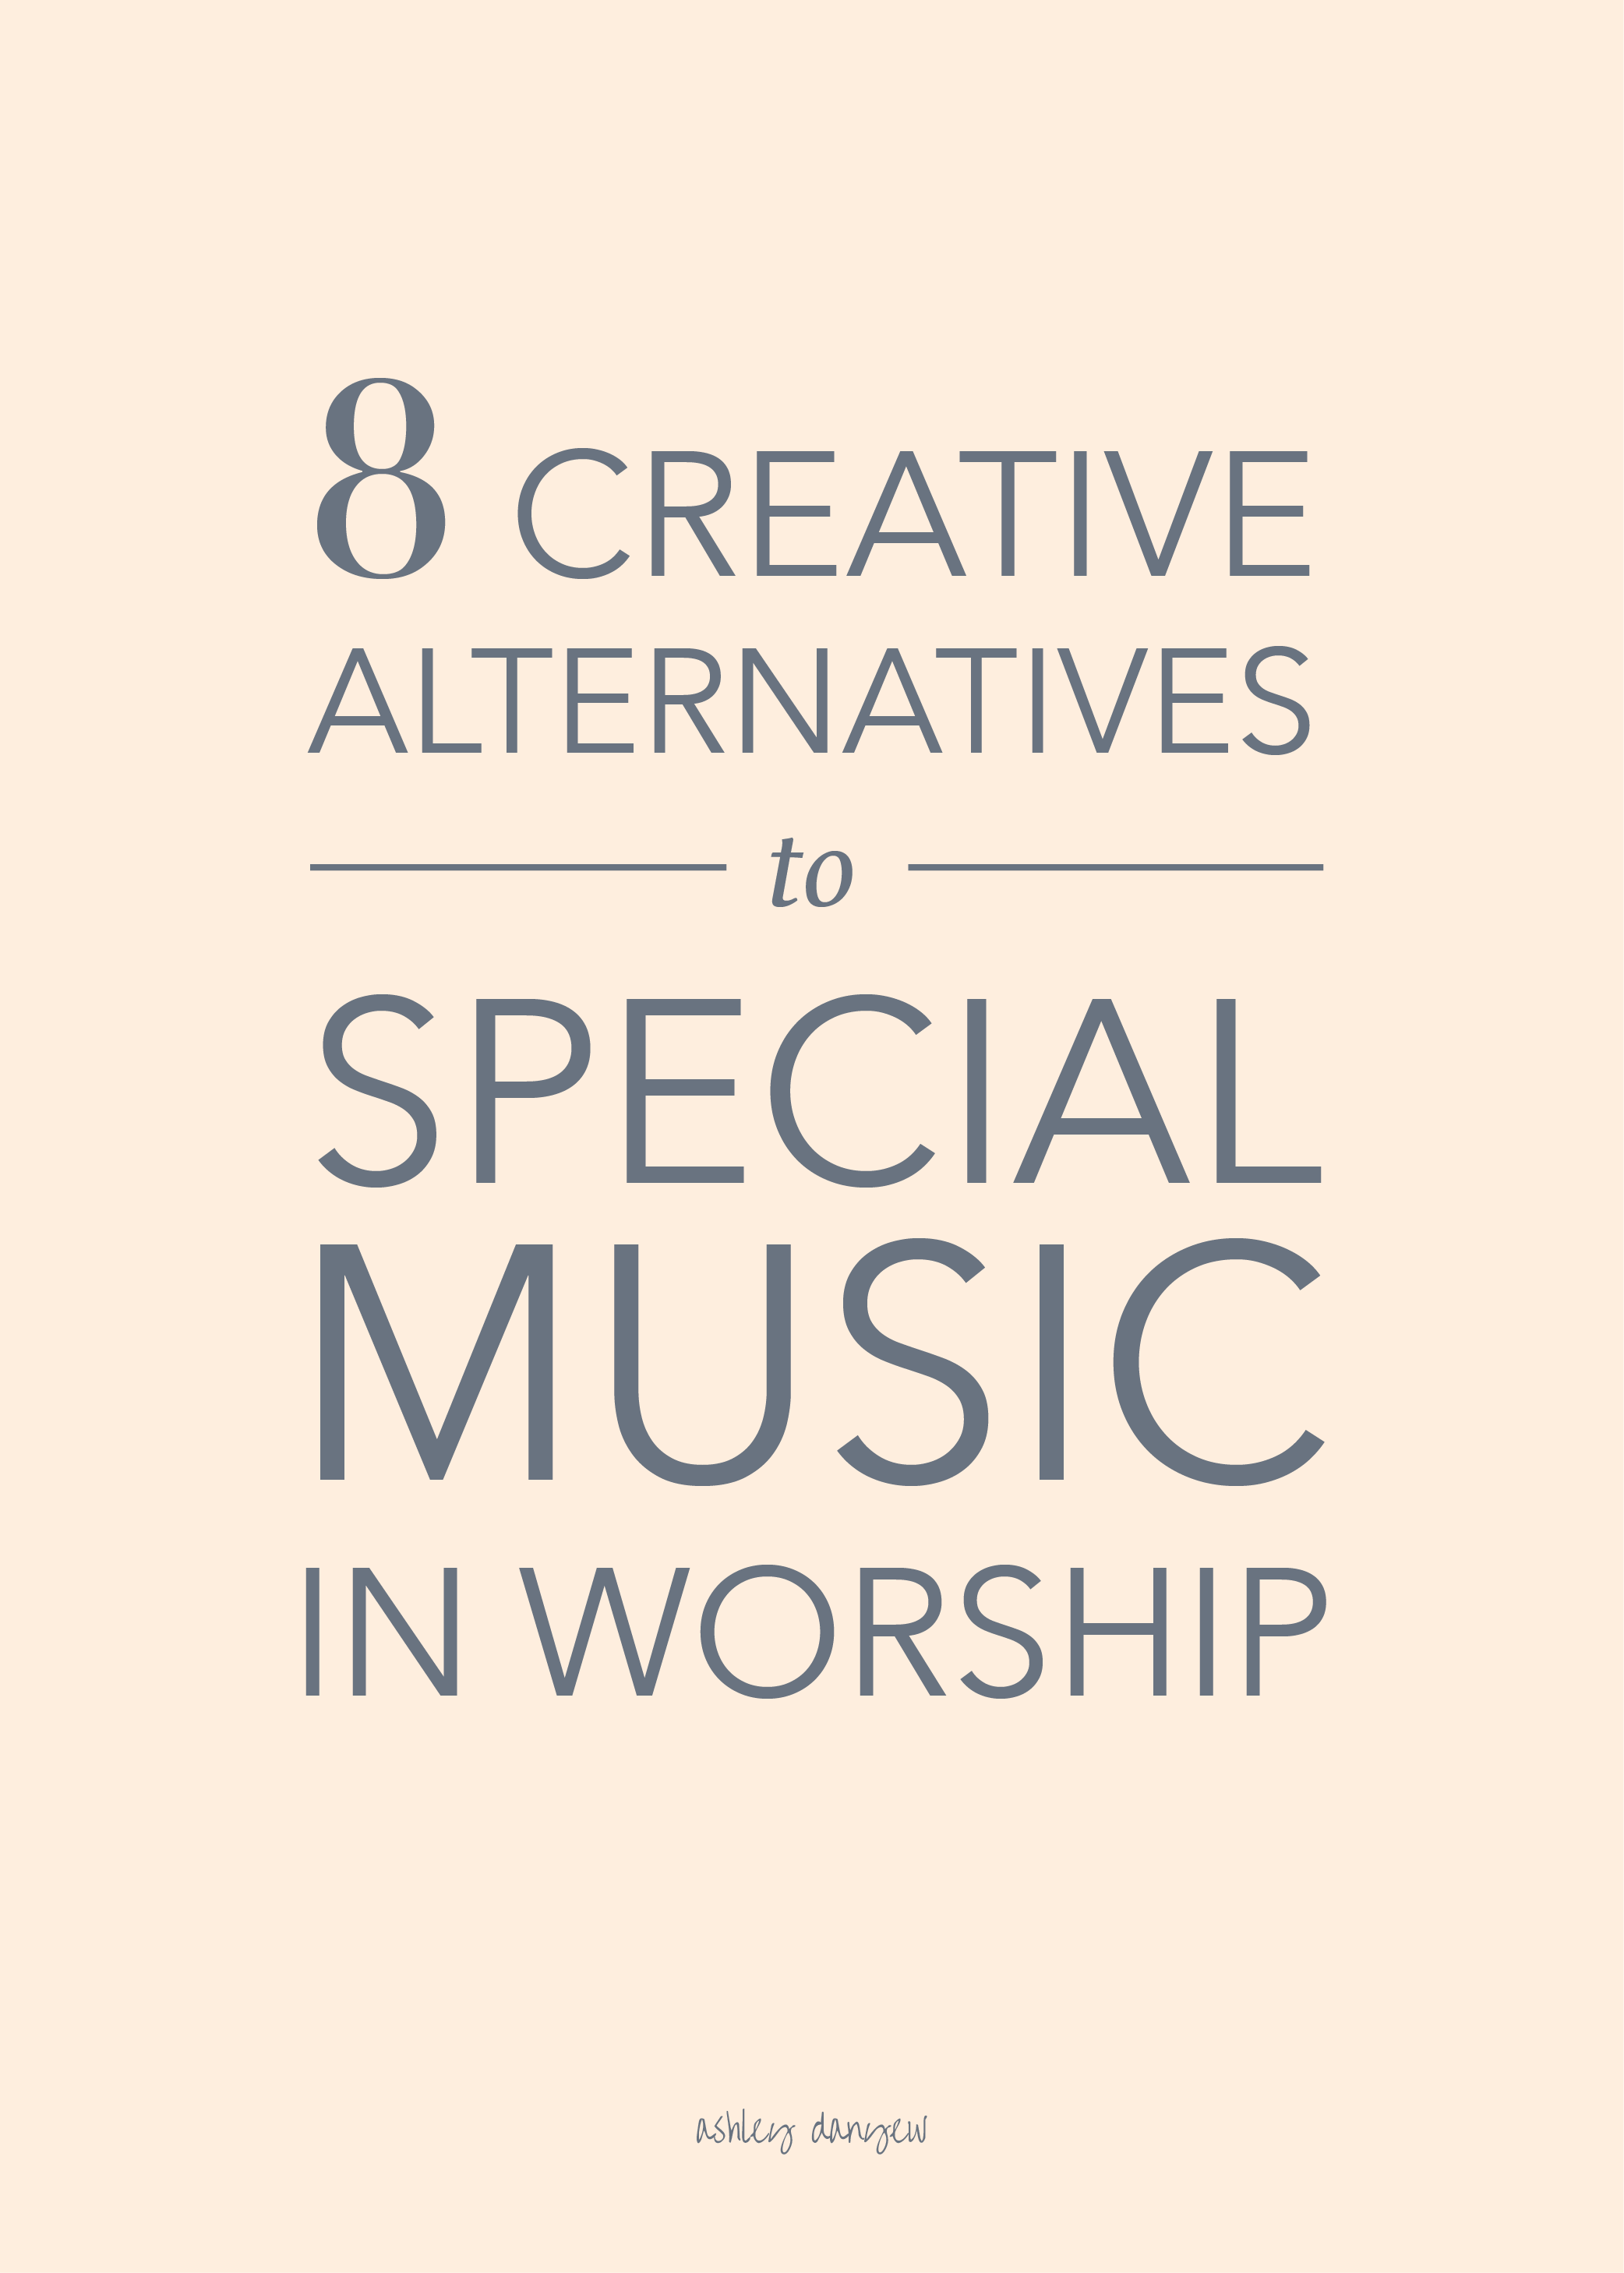 Copy of 8 Creative Alternatives to Special Music in Worship